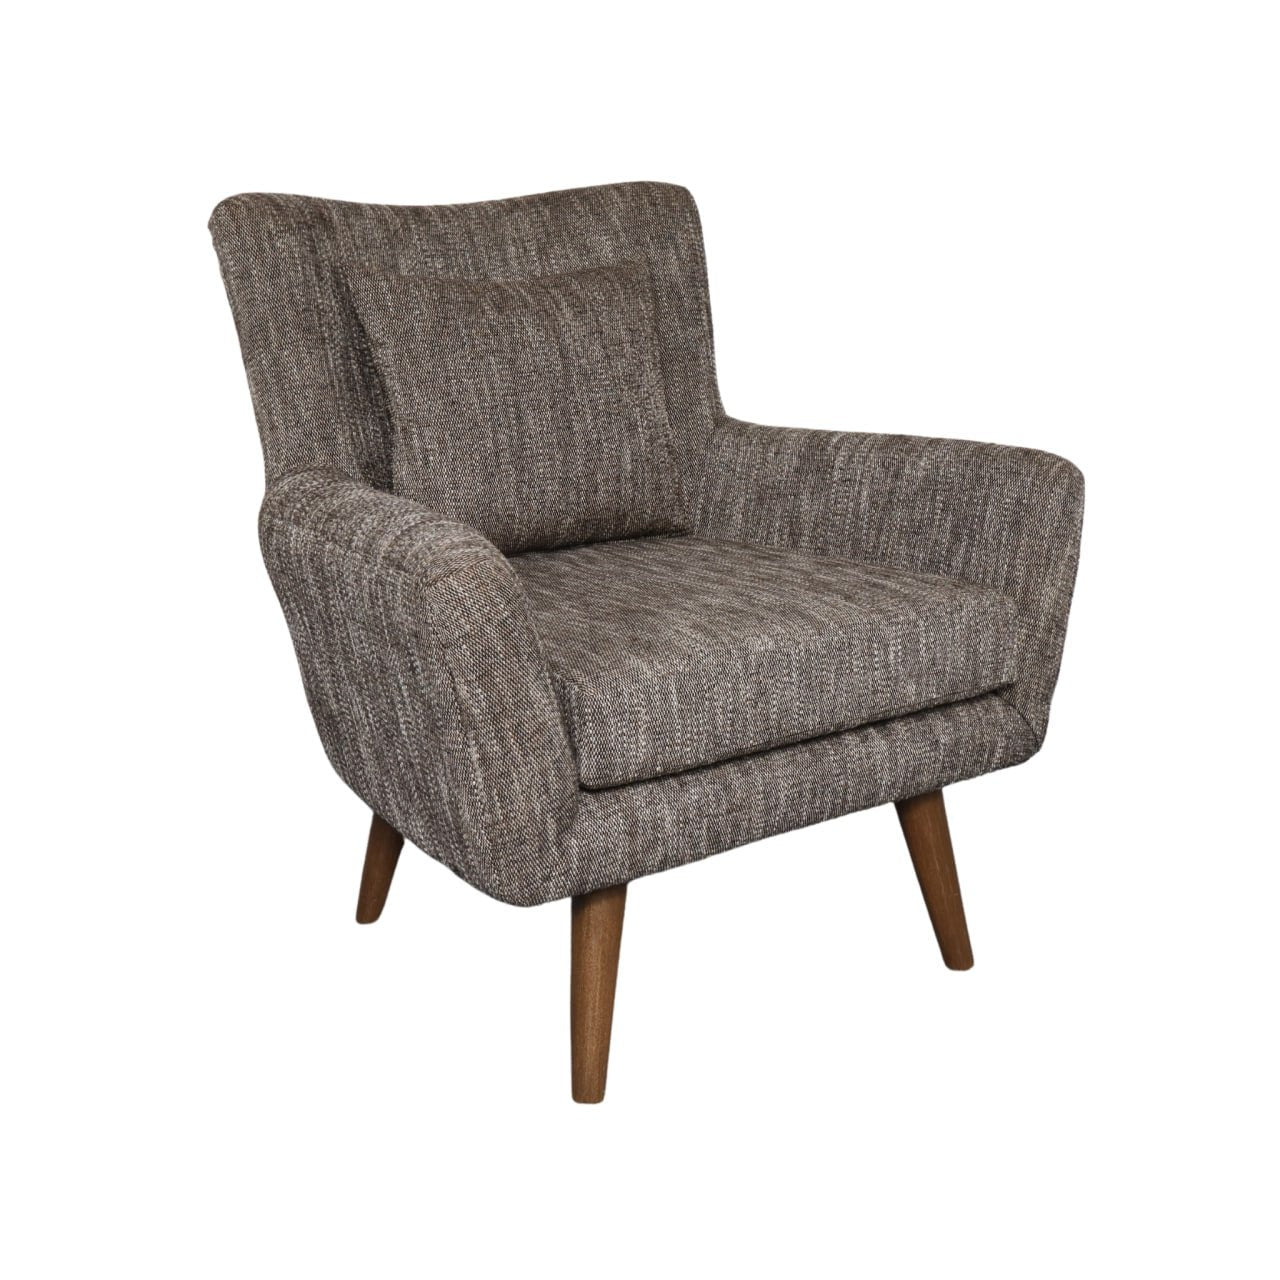 ALTHEIA Accent Fabric Chair AF Home